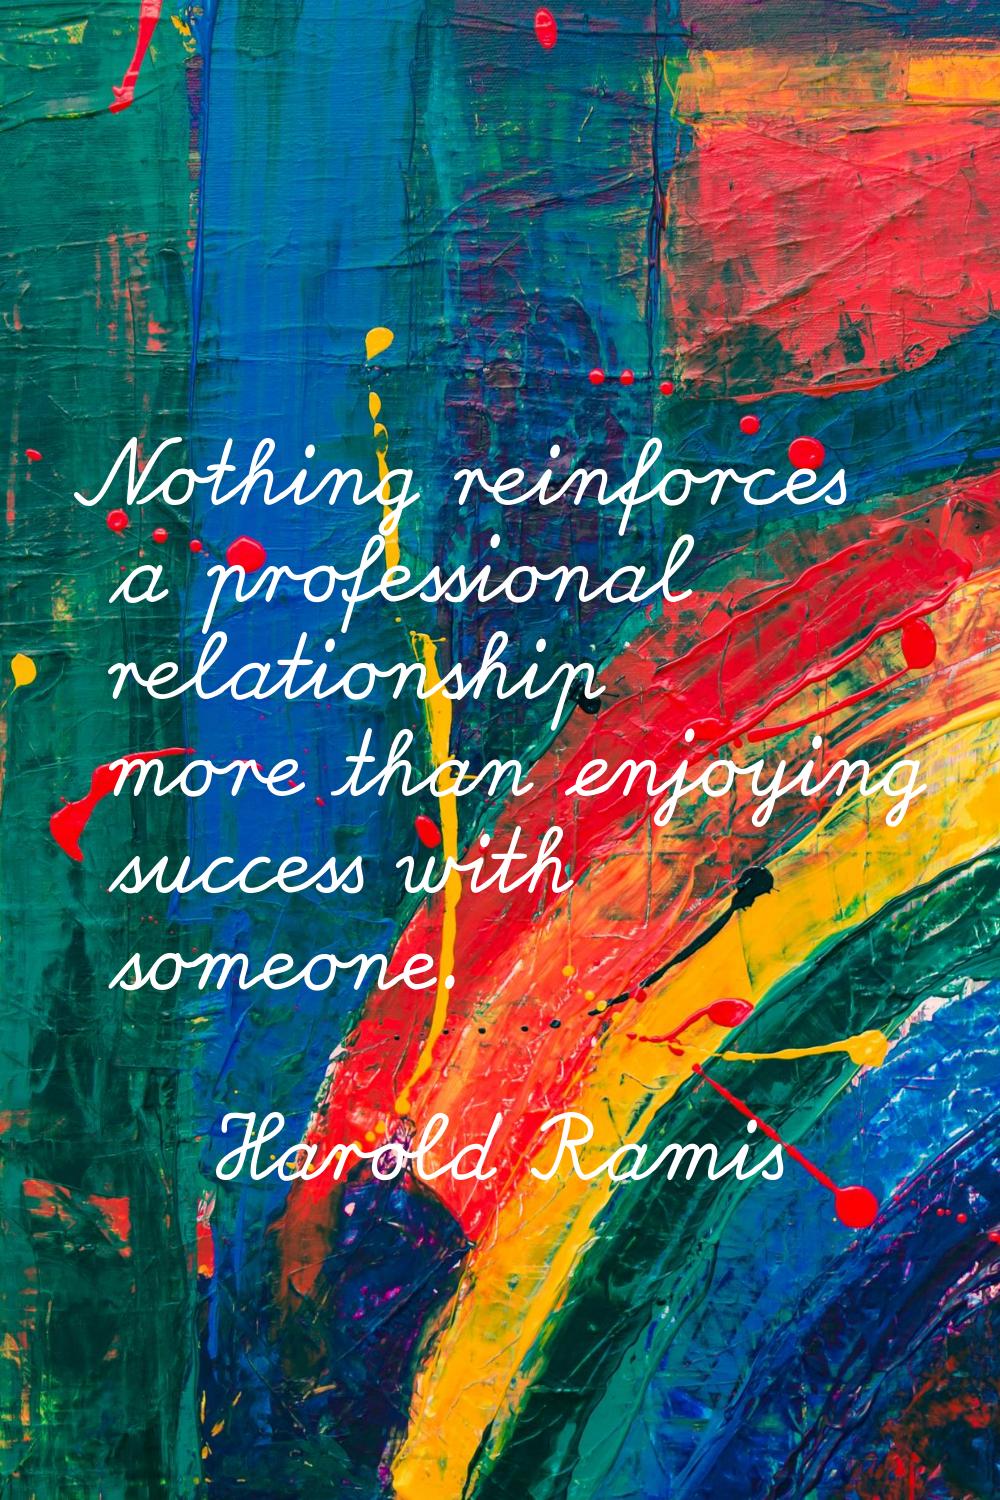 Nothing reinforces a professional relationship more than enjoying success with someone.